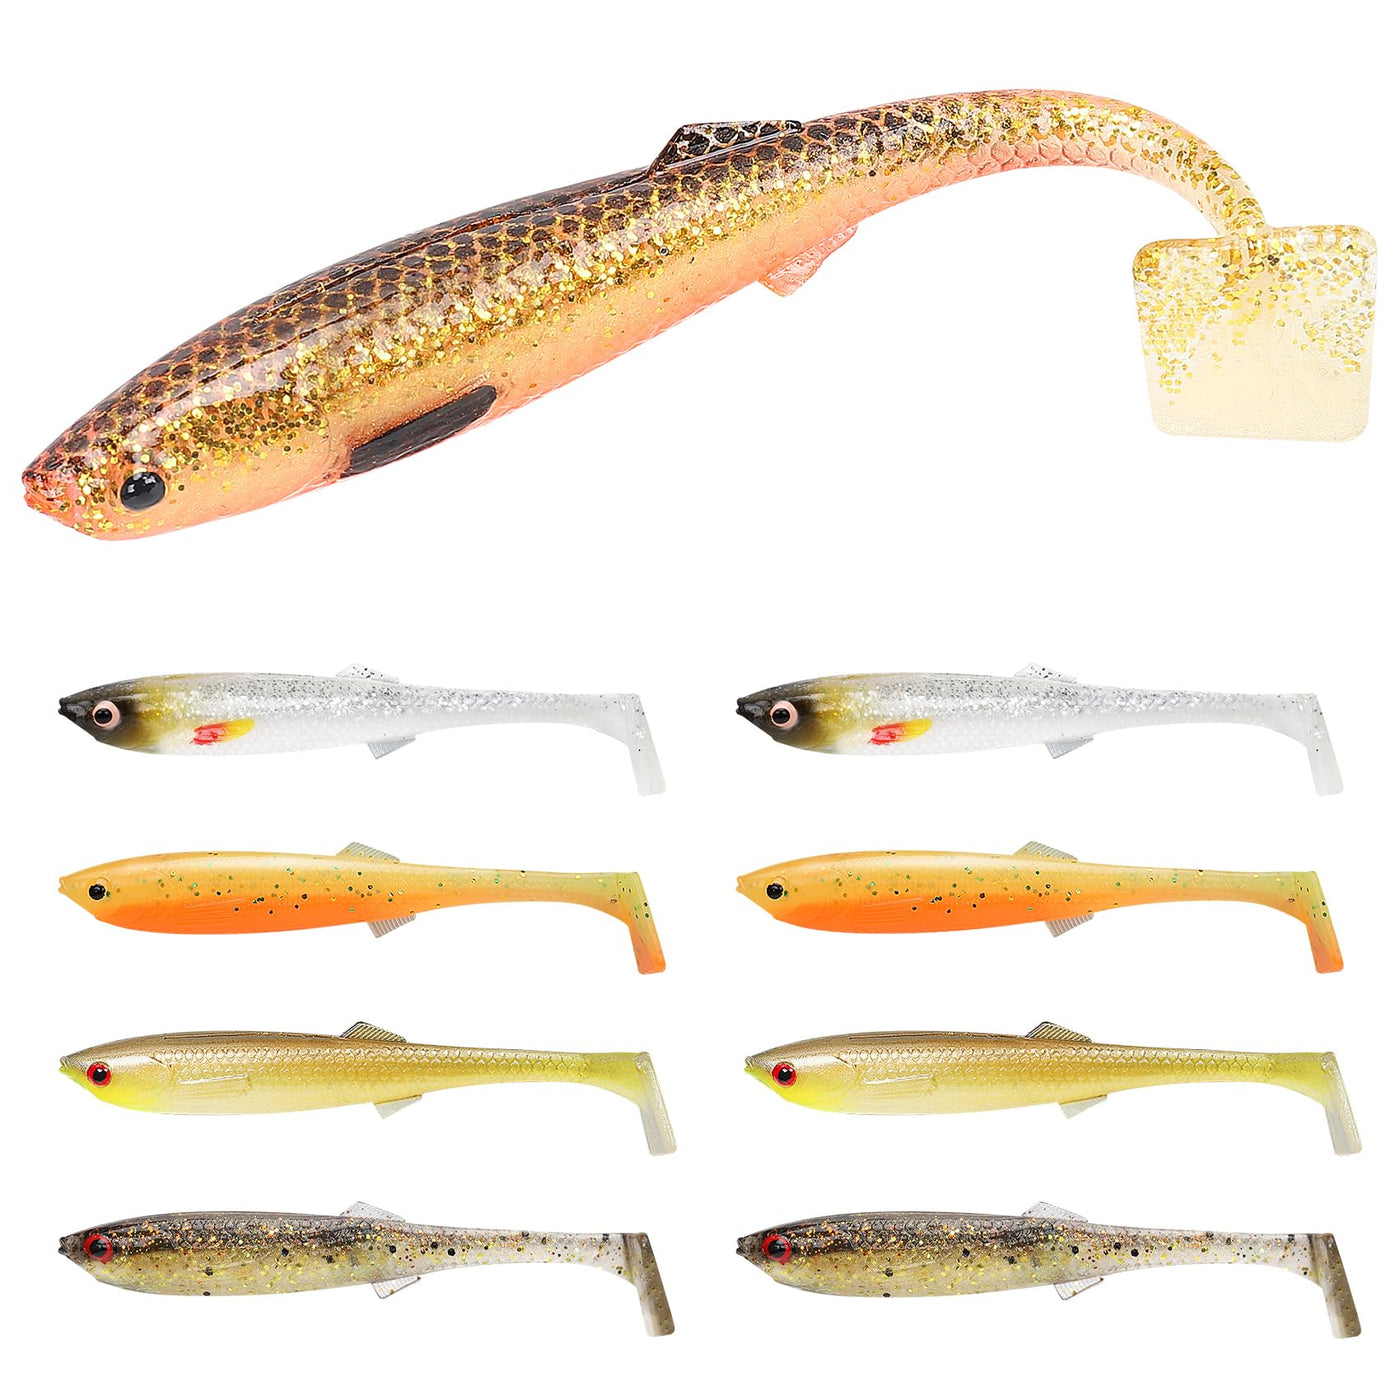 TRUSCEND® Hand-Painted Soft Paddle Tail Fishing Lures 3.35" 0.2oz 10pcs